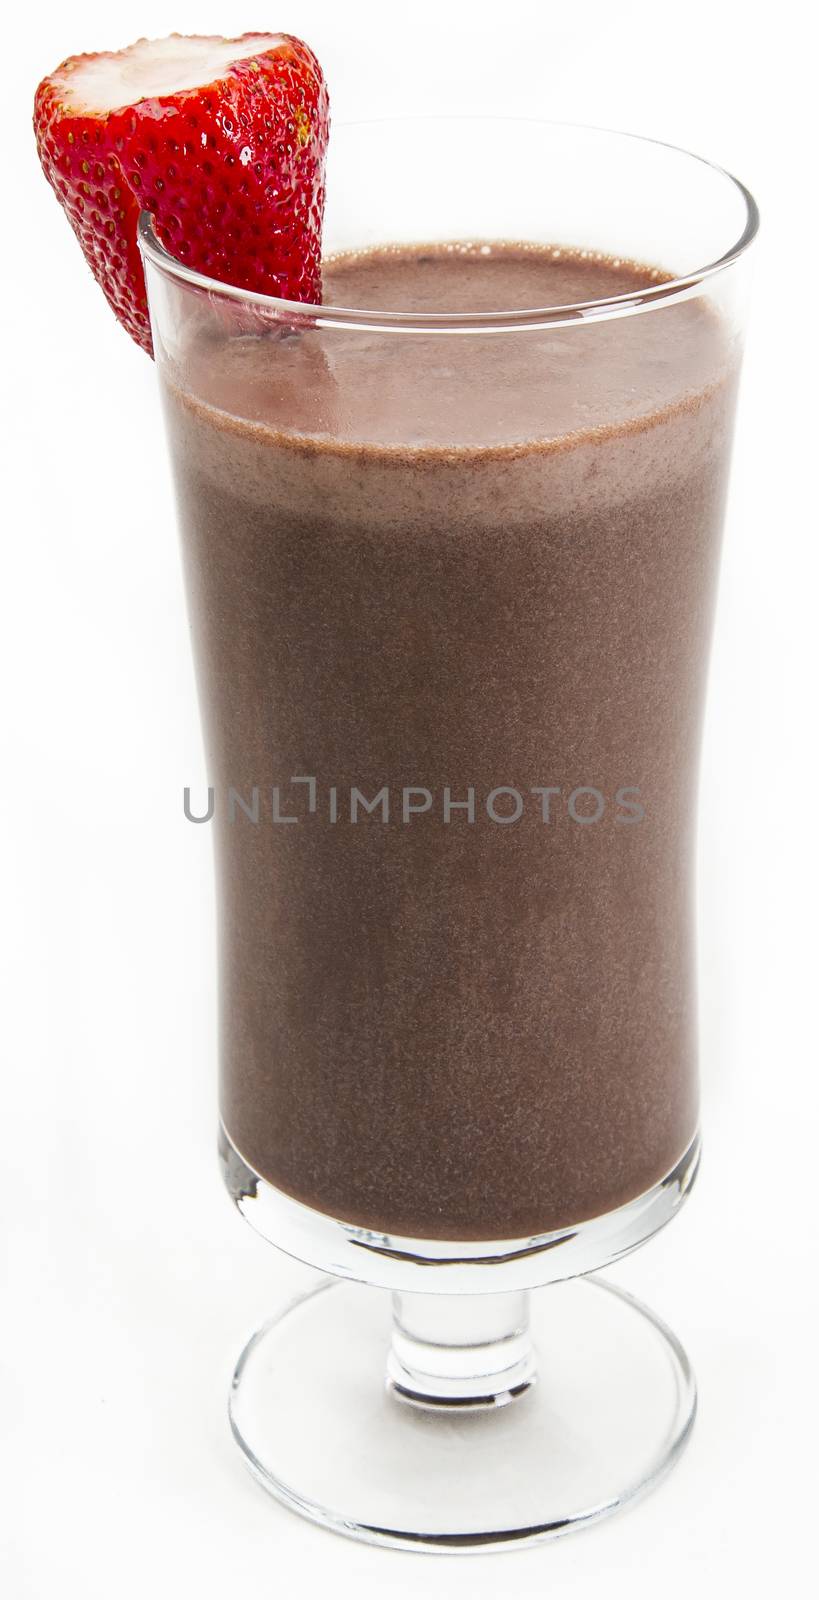 Chocolate milkshake with a strawberry on the side against a white background